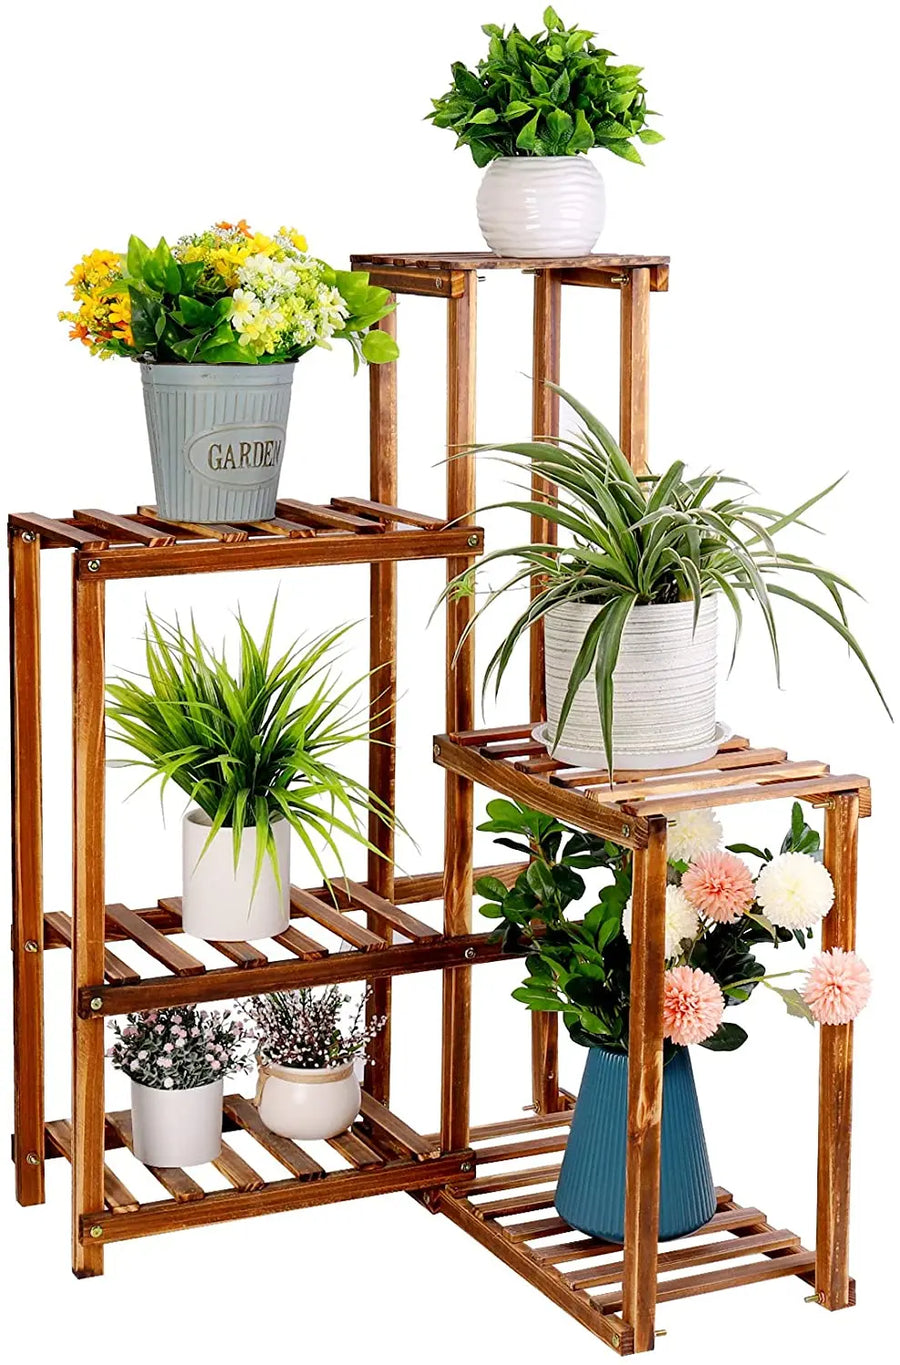 Natural Harmony 6-Tier Wooden Flower Pot Stand - DECOR MODISH Default Title DECOR MODISH Default Title